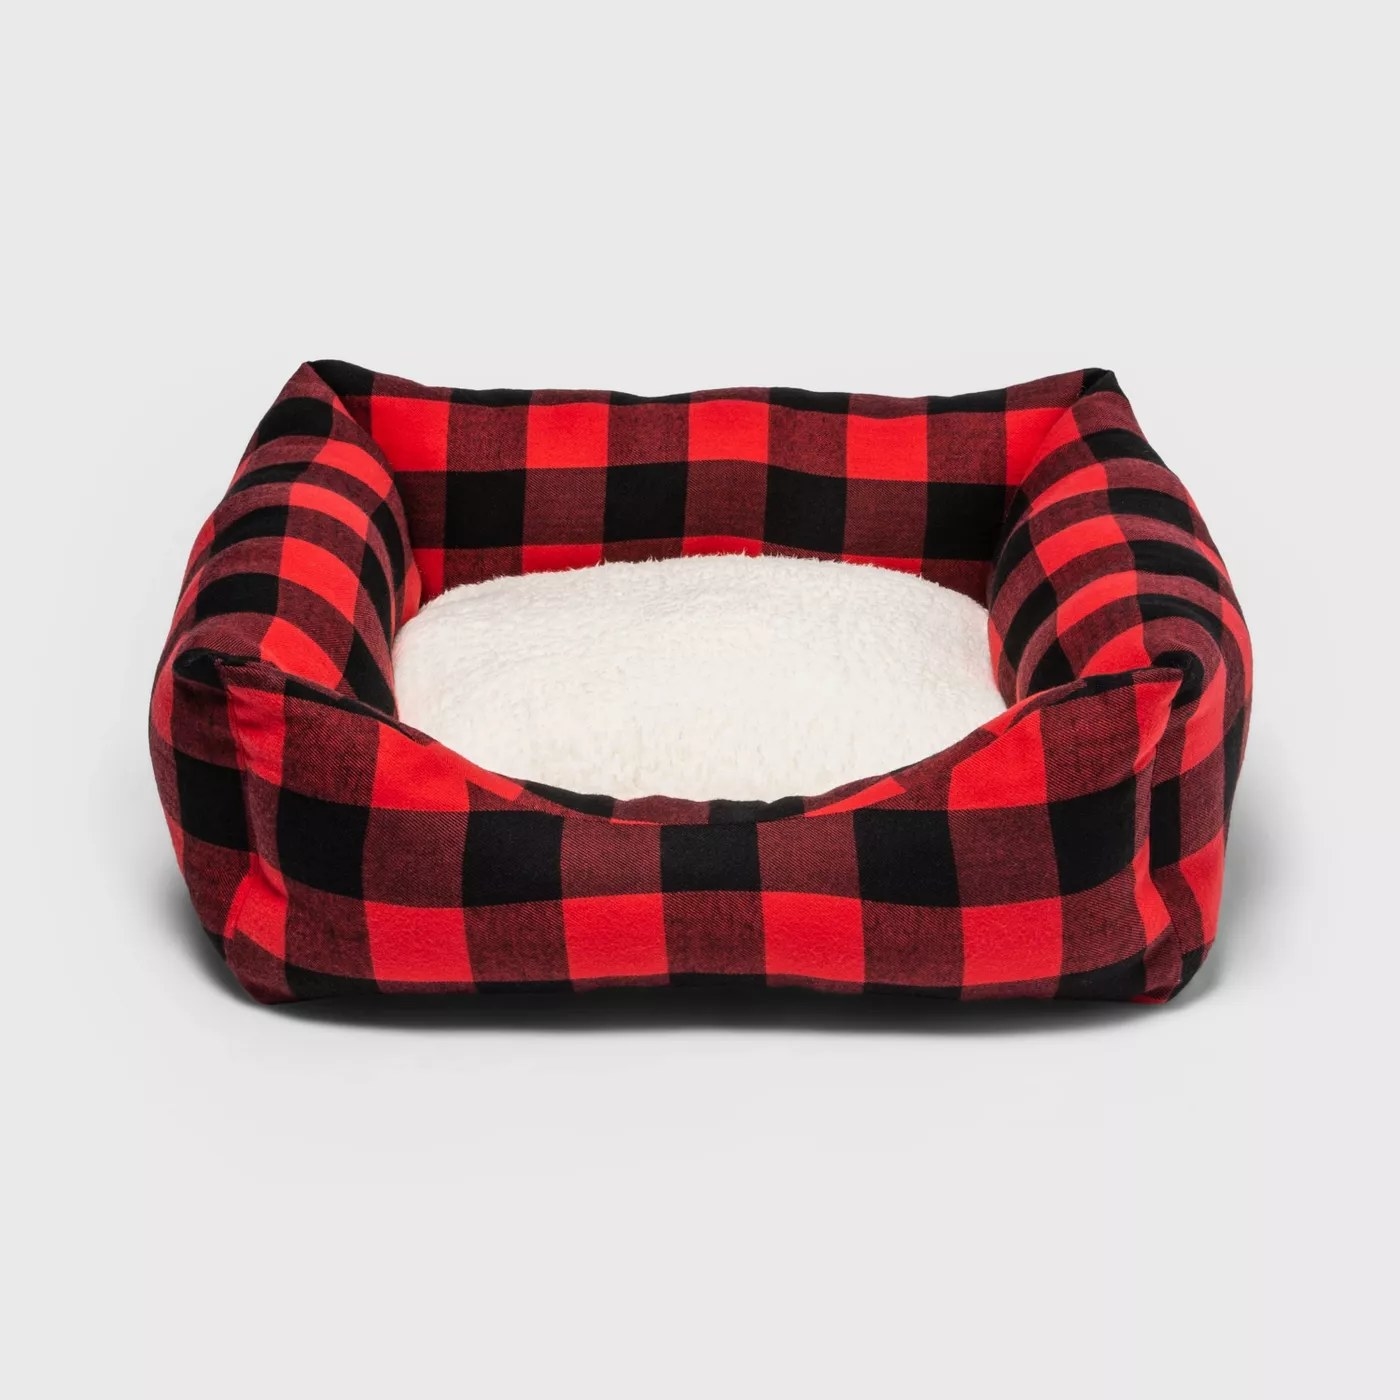 The red and black dog bed with a Sherpa cushion